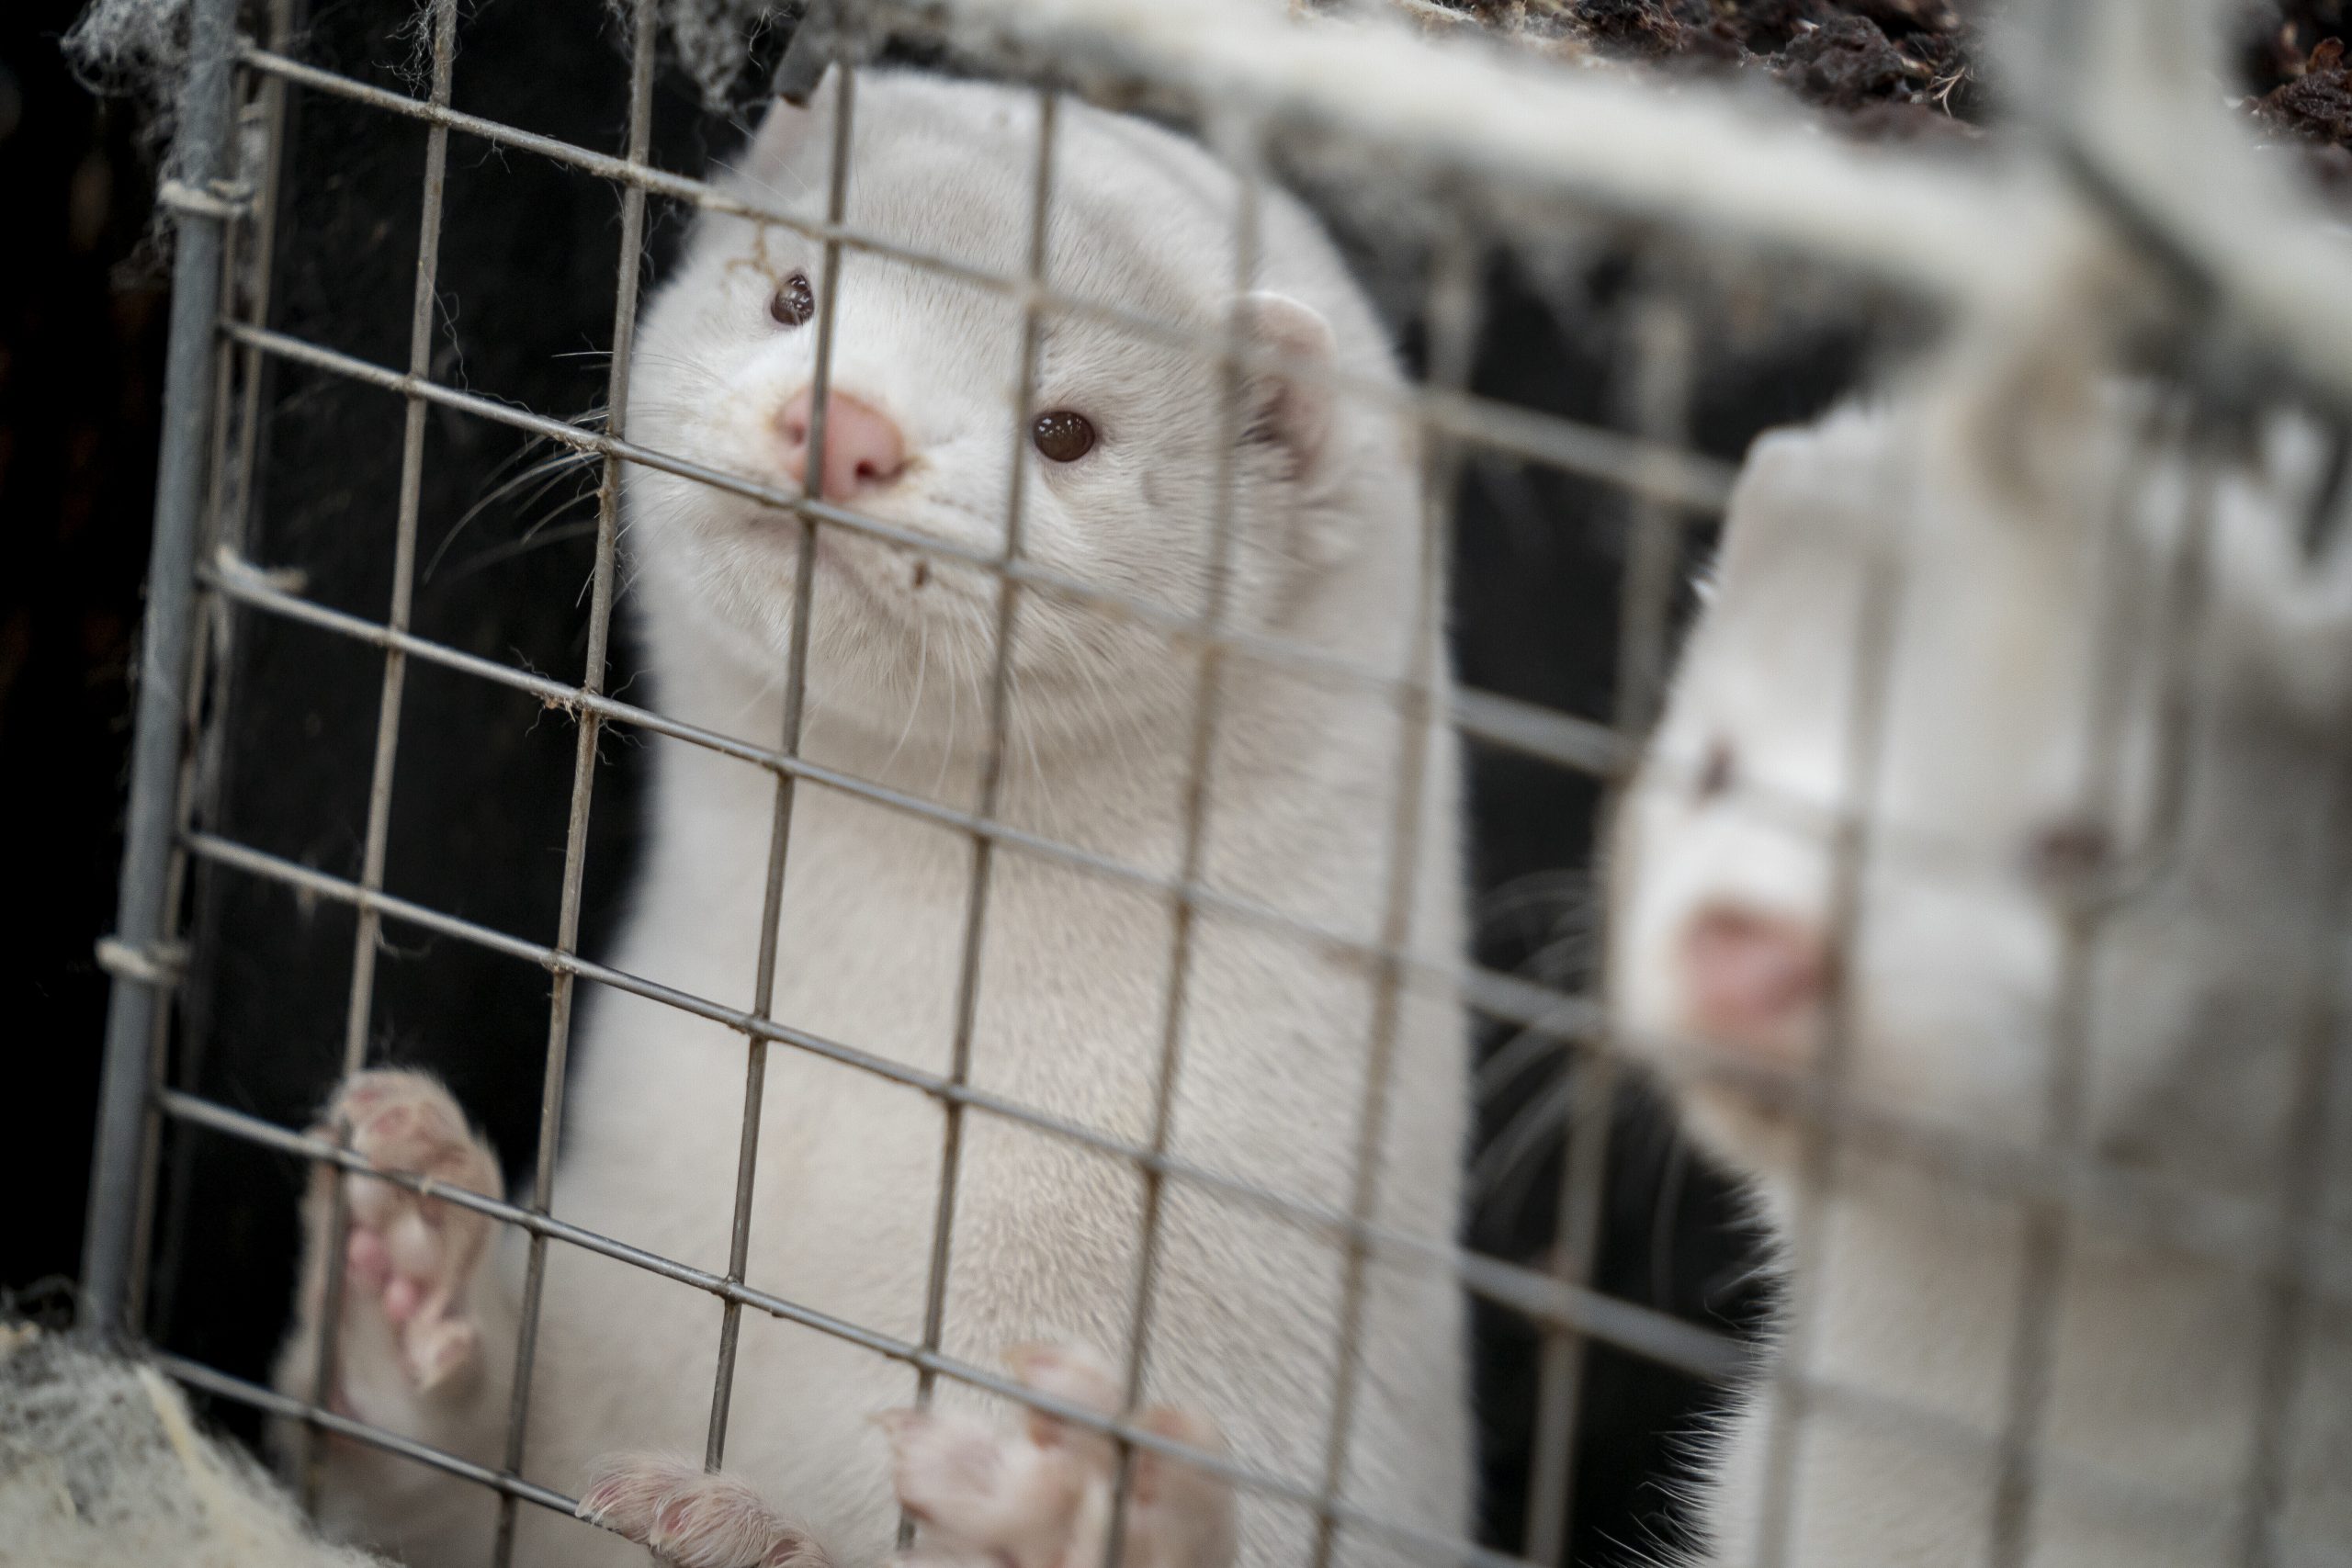 The 'Zombie Minks' in Denmark who were killed to prevent the spread of the corona virus seem to have risen from their graves